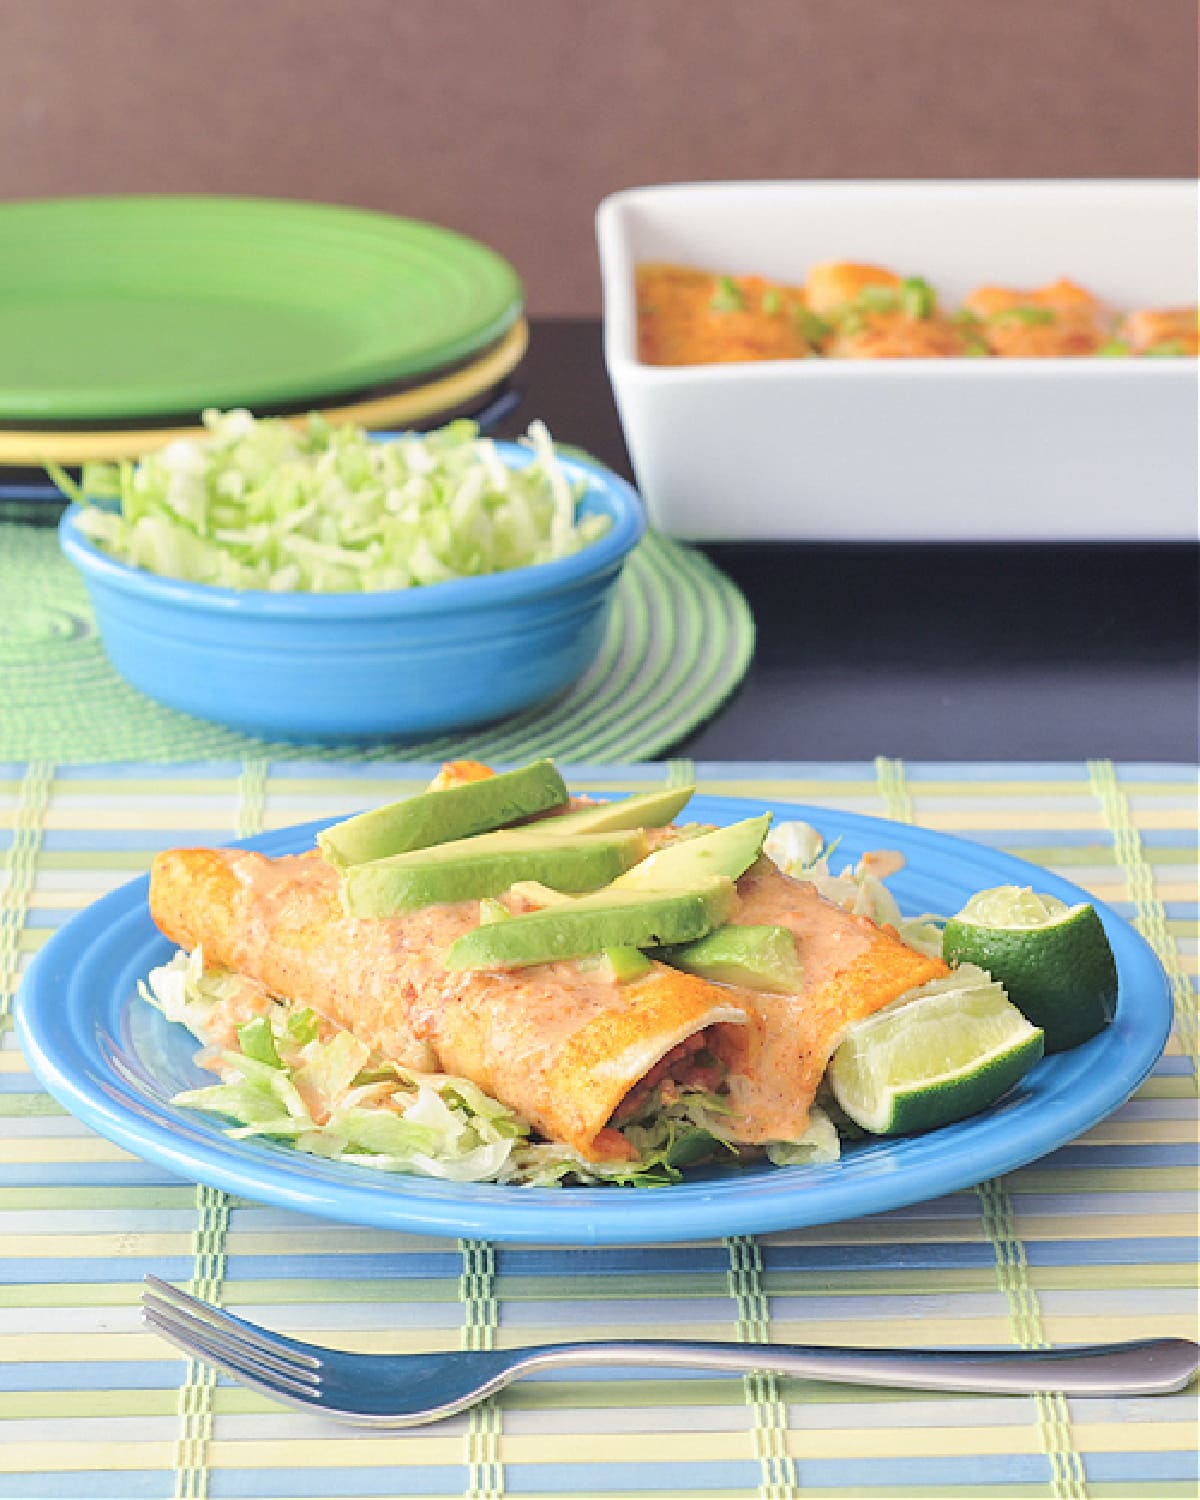 two tortilla soup enchiladas on a blue Fiestaware plate: creamy orange colored sauce tops bean, corn, pepper and rice stuffed enchiladas, topped with sliced avocado. two lime wedges on the side. blue bowl of shredded lettuce and white ceramic baking dish full of enchiladas in background.